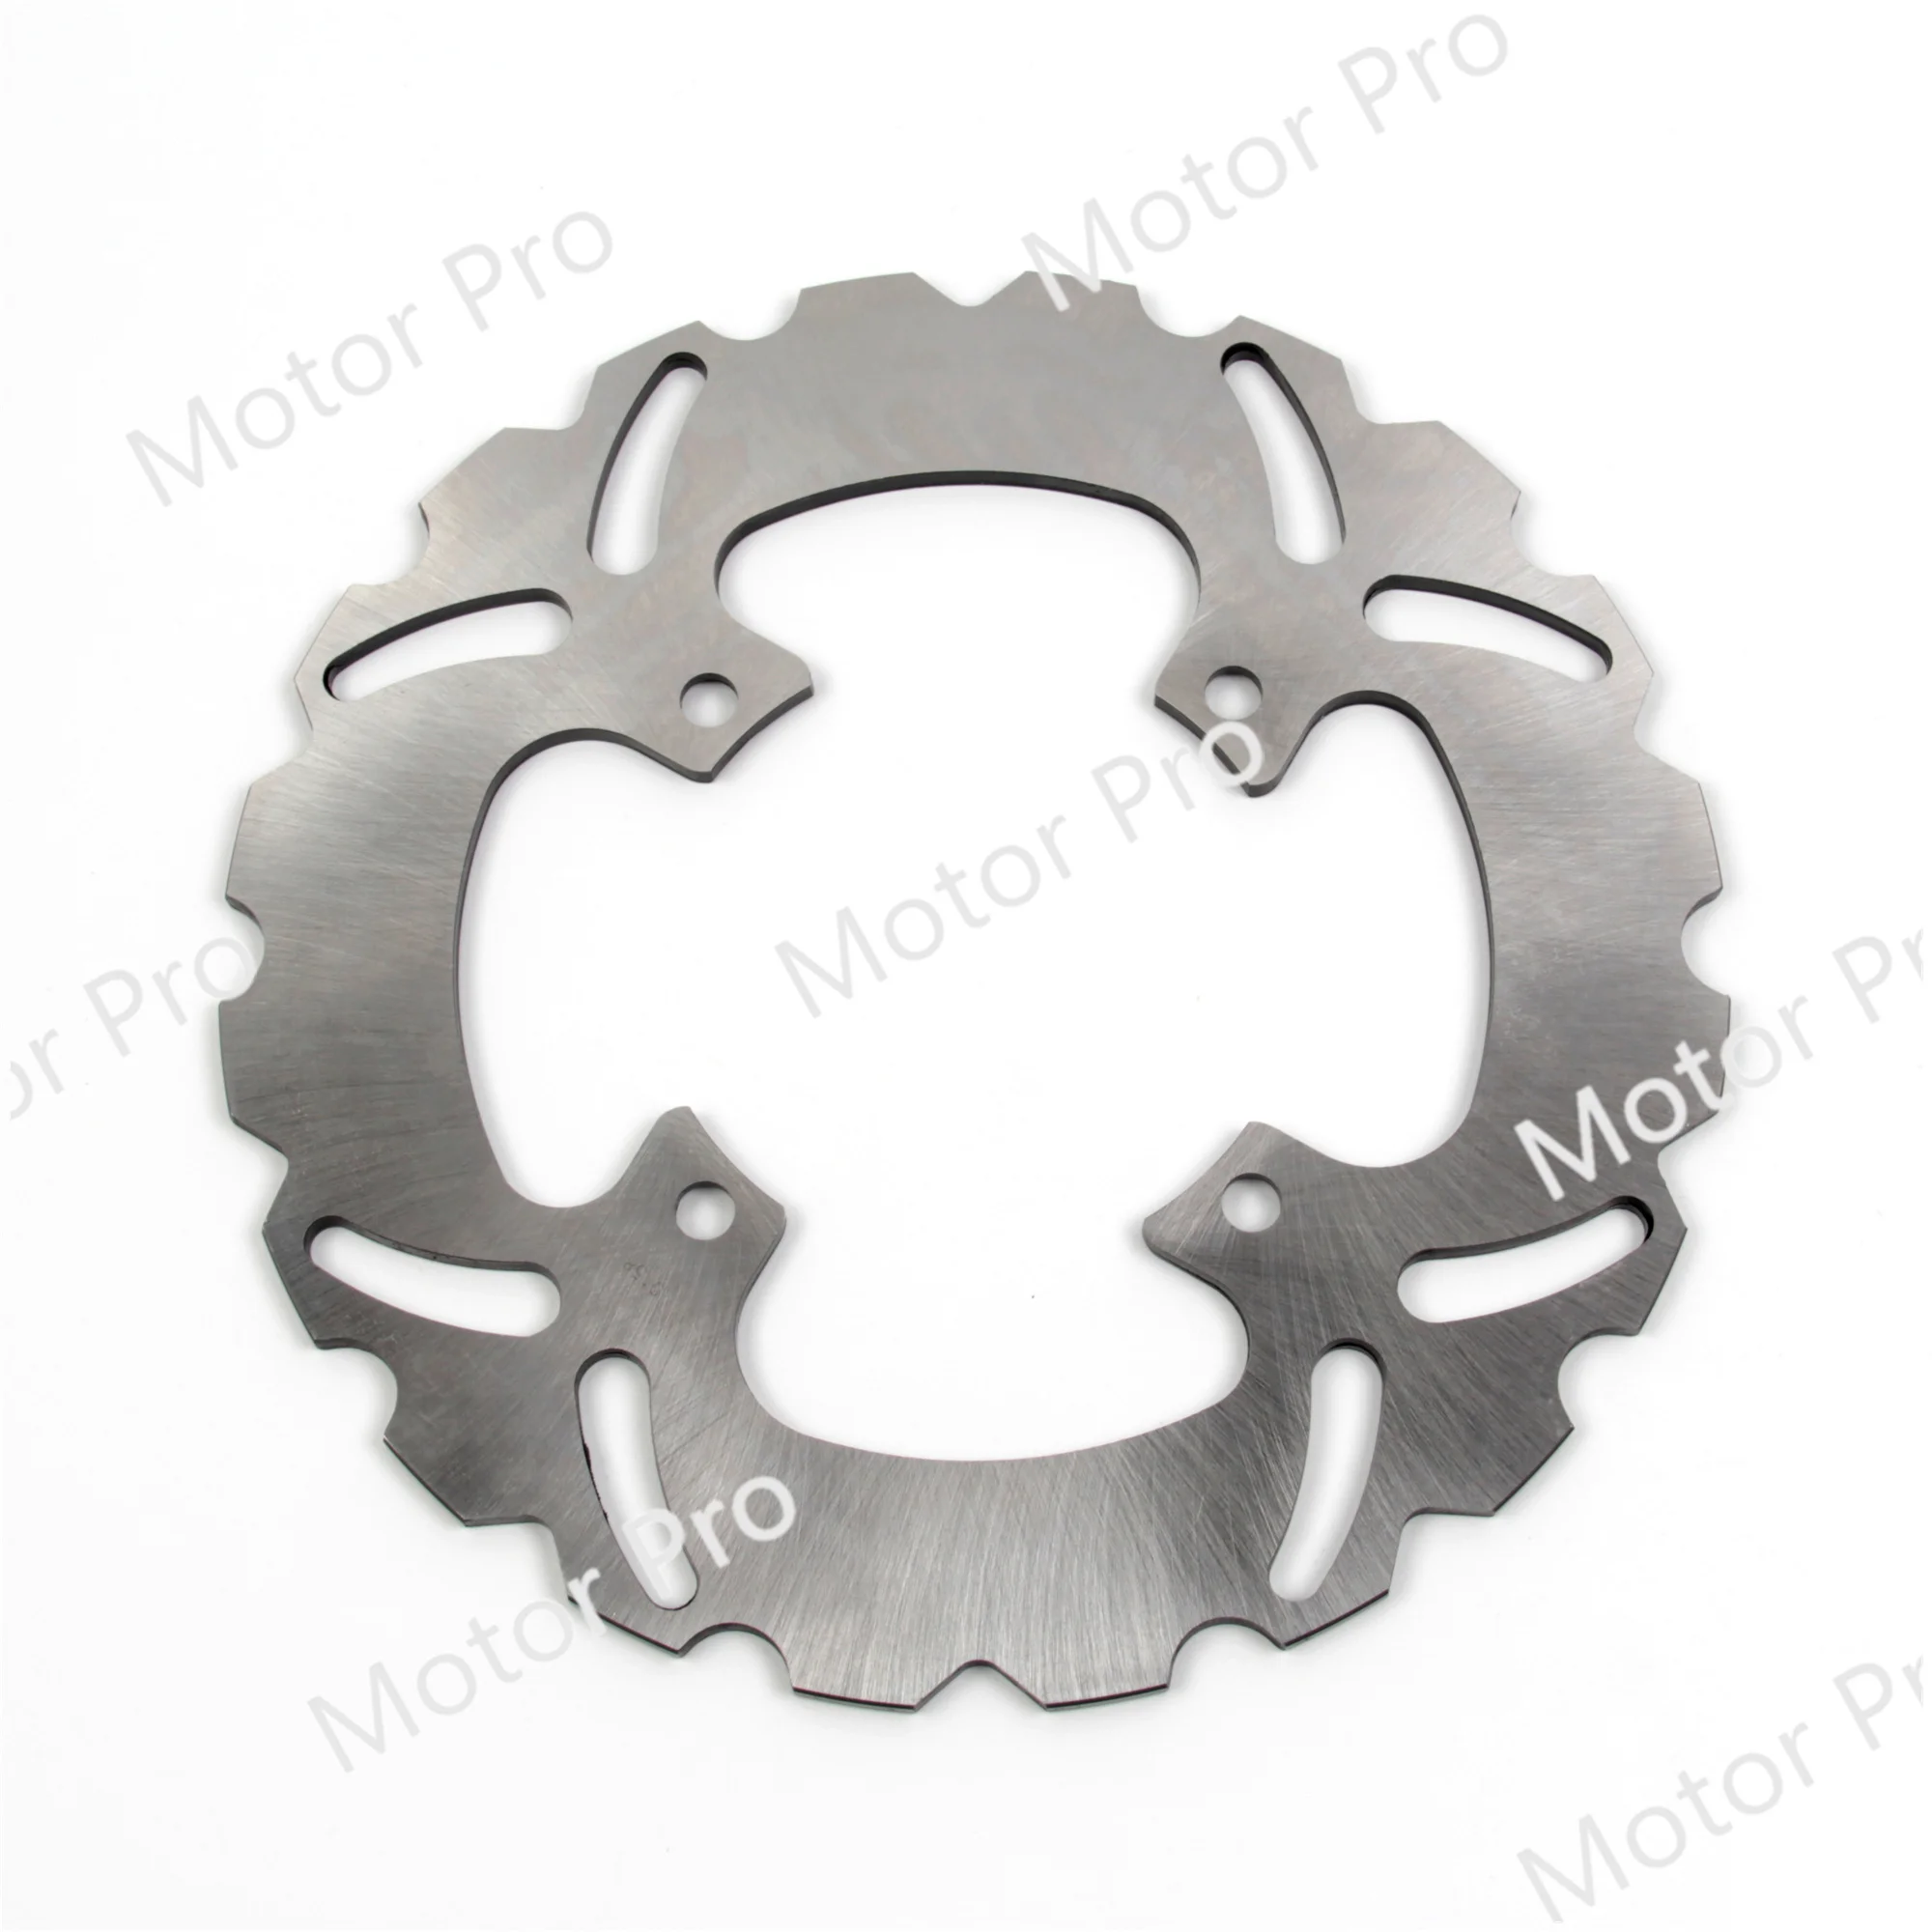 

Motorcycle Rear Brake Disc For Honda RVF400 NC35 1993 1994 RVF 400 93 94 Brake Rotor Disk Stainless Steel Accessories